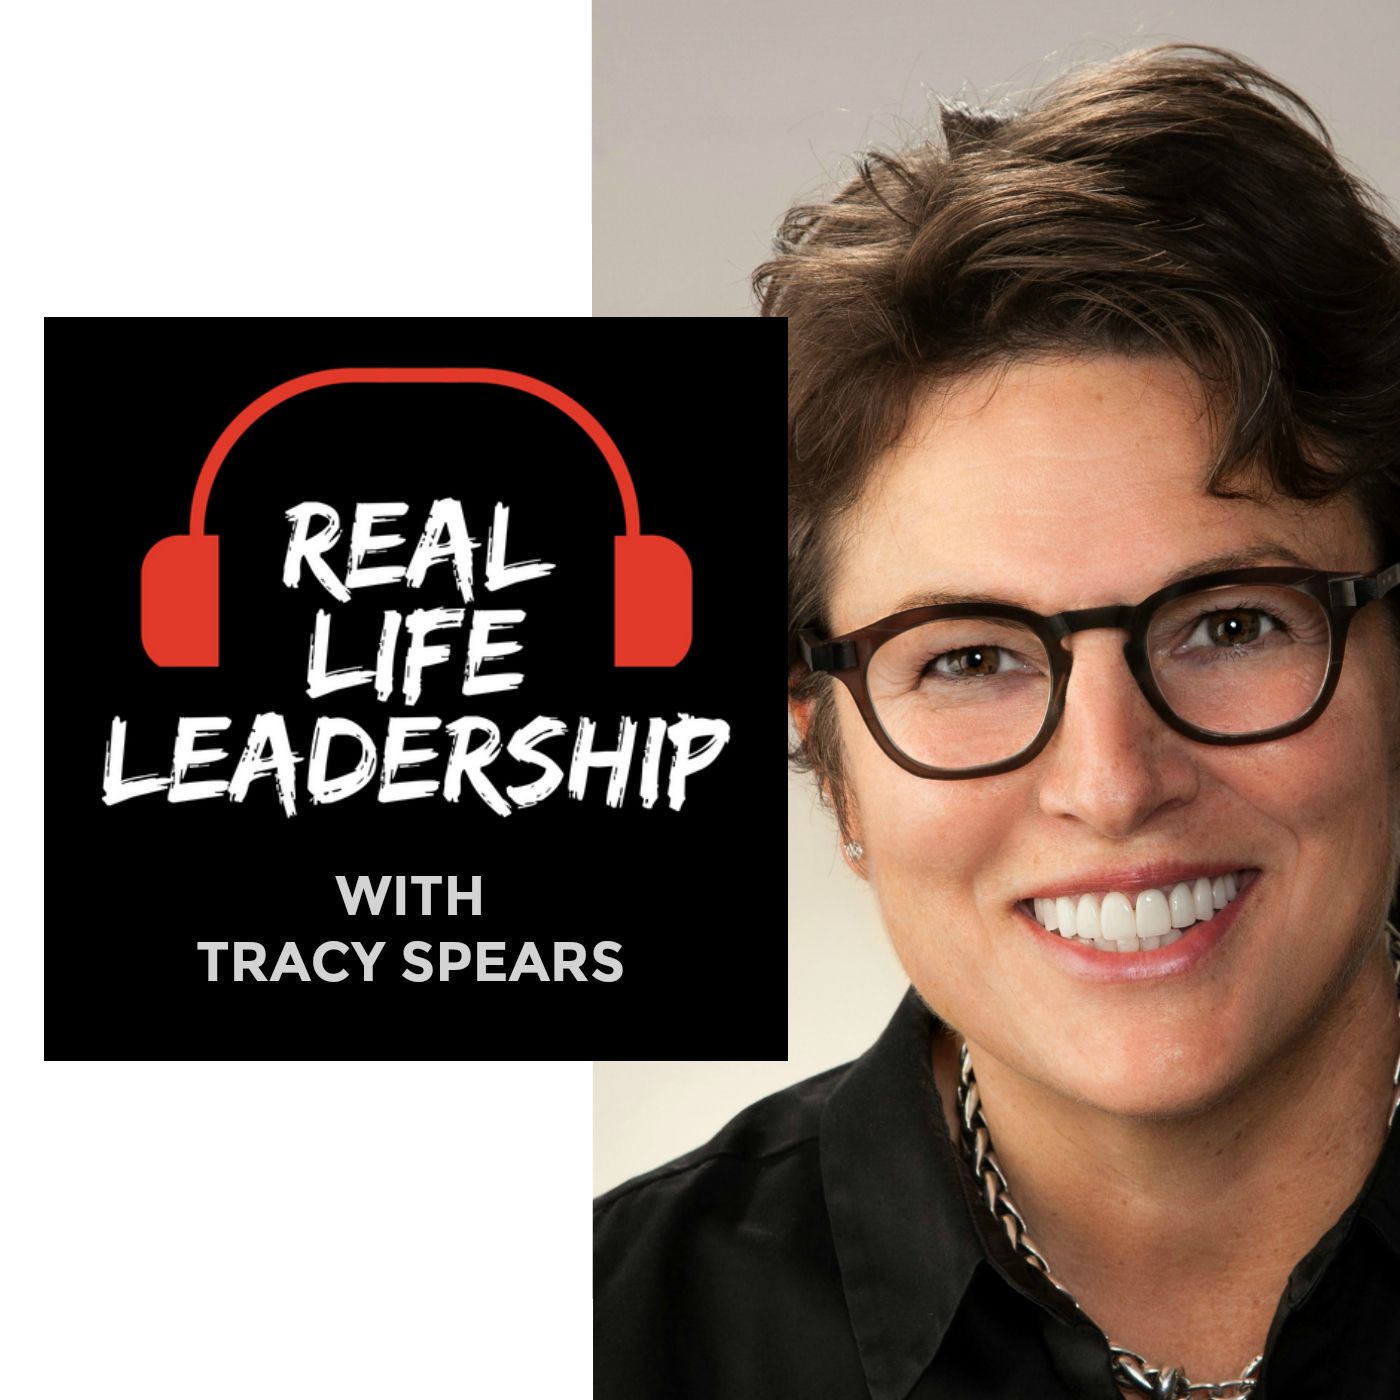 Real-Life Leadership with Tracy Spears